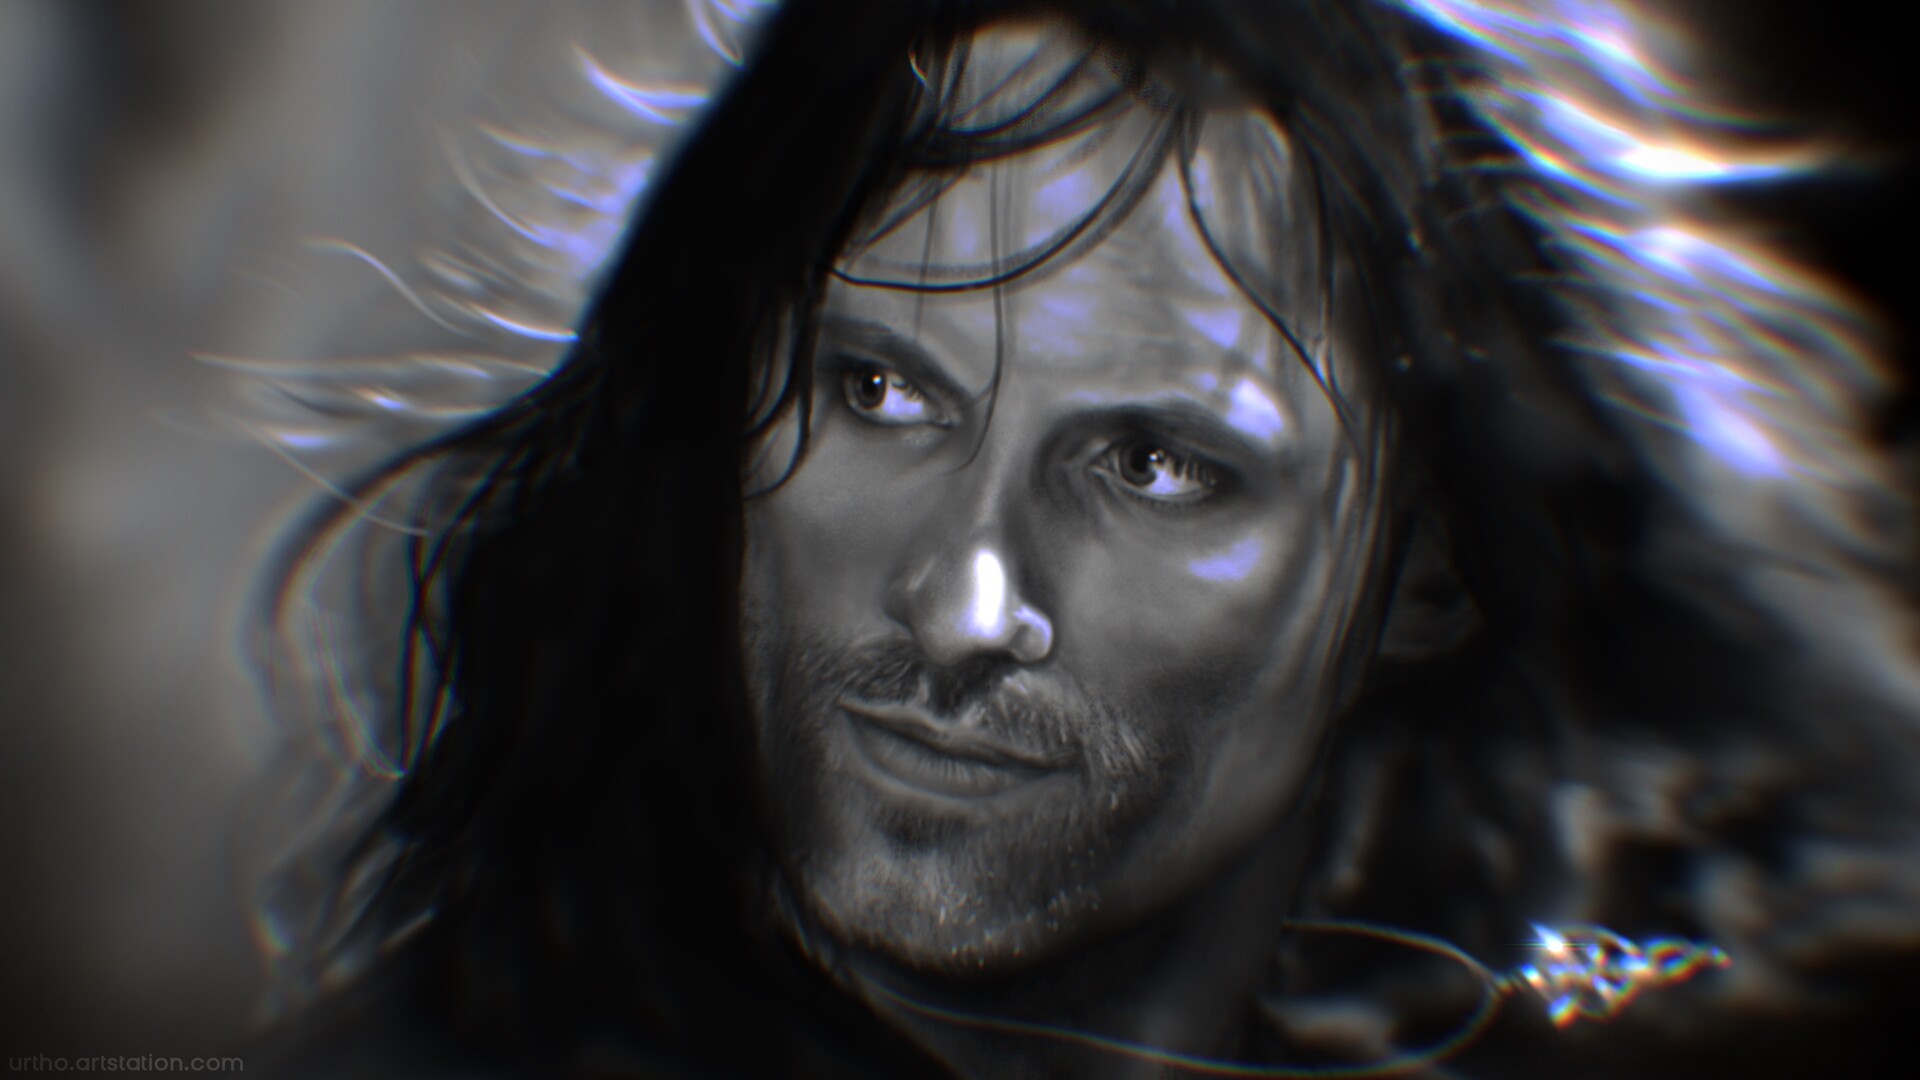 Wallpaper  1024x768 px Aragorn movies sepia The Lord of the Rings The  Return of the King Viggo Mortensen 1024x768  CoolWallpapers  668520  HD  Wallpapers  WallHere